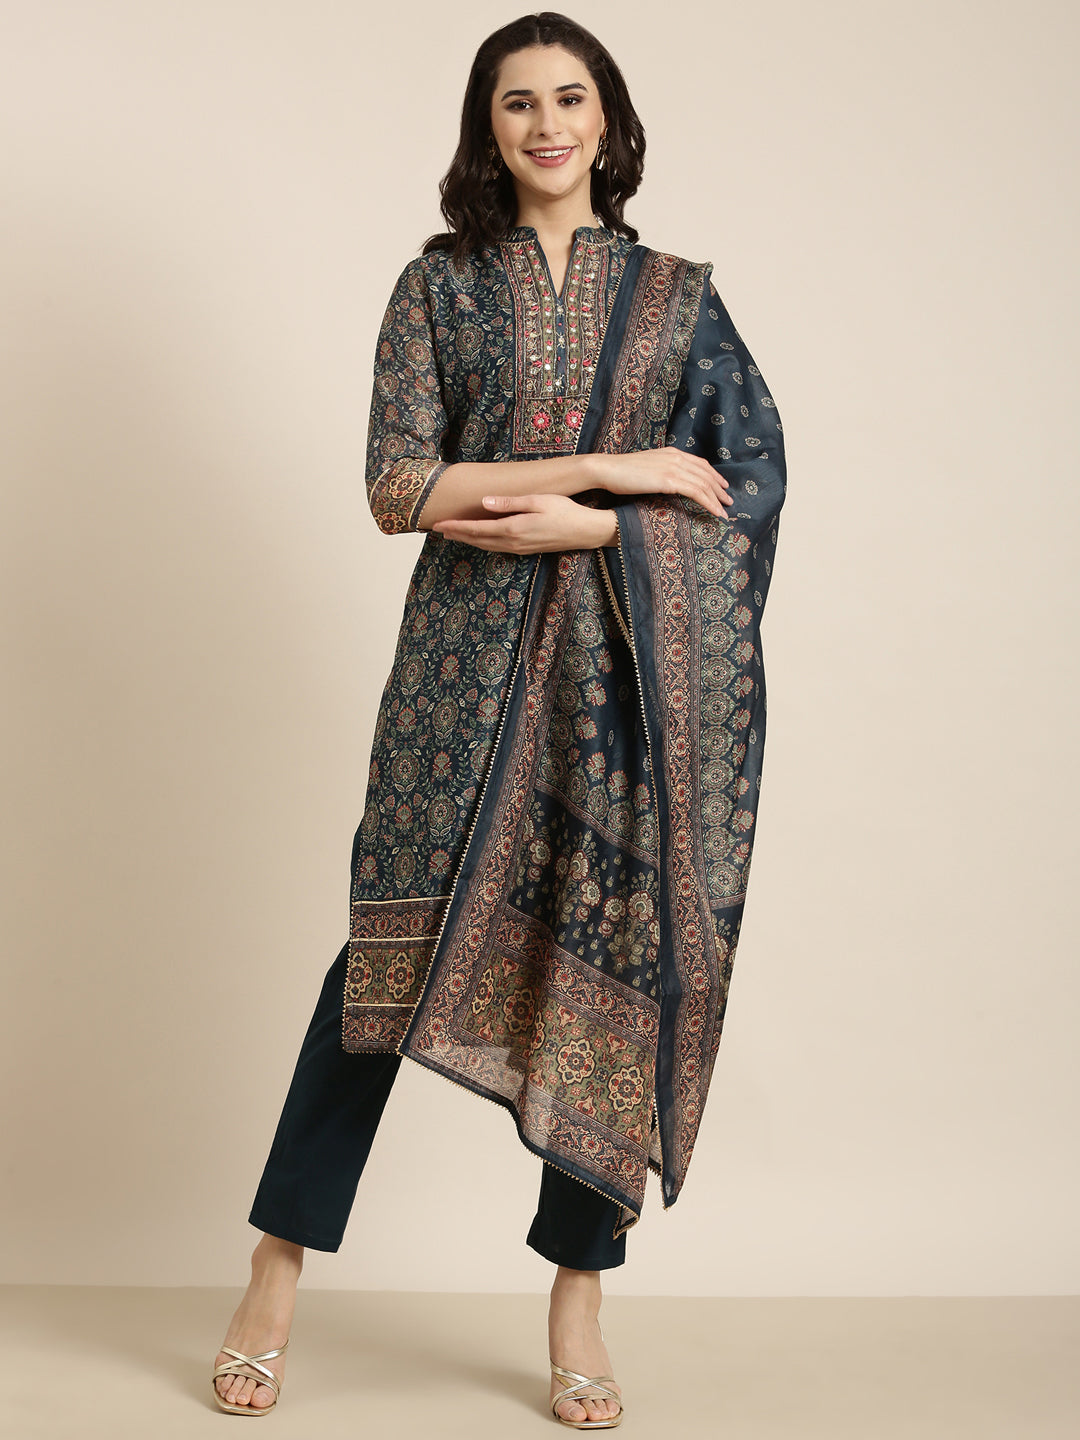 Women Straight Teal Ethnic Motifs Kurta and Trousers Set Comes With Dupatta